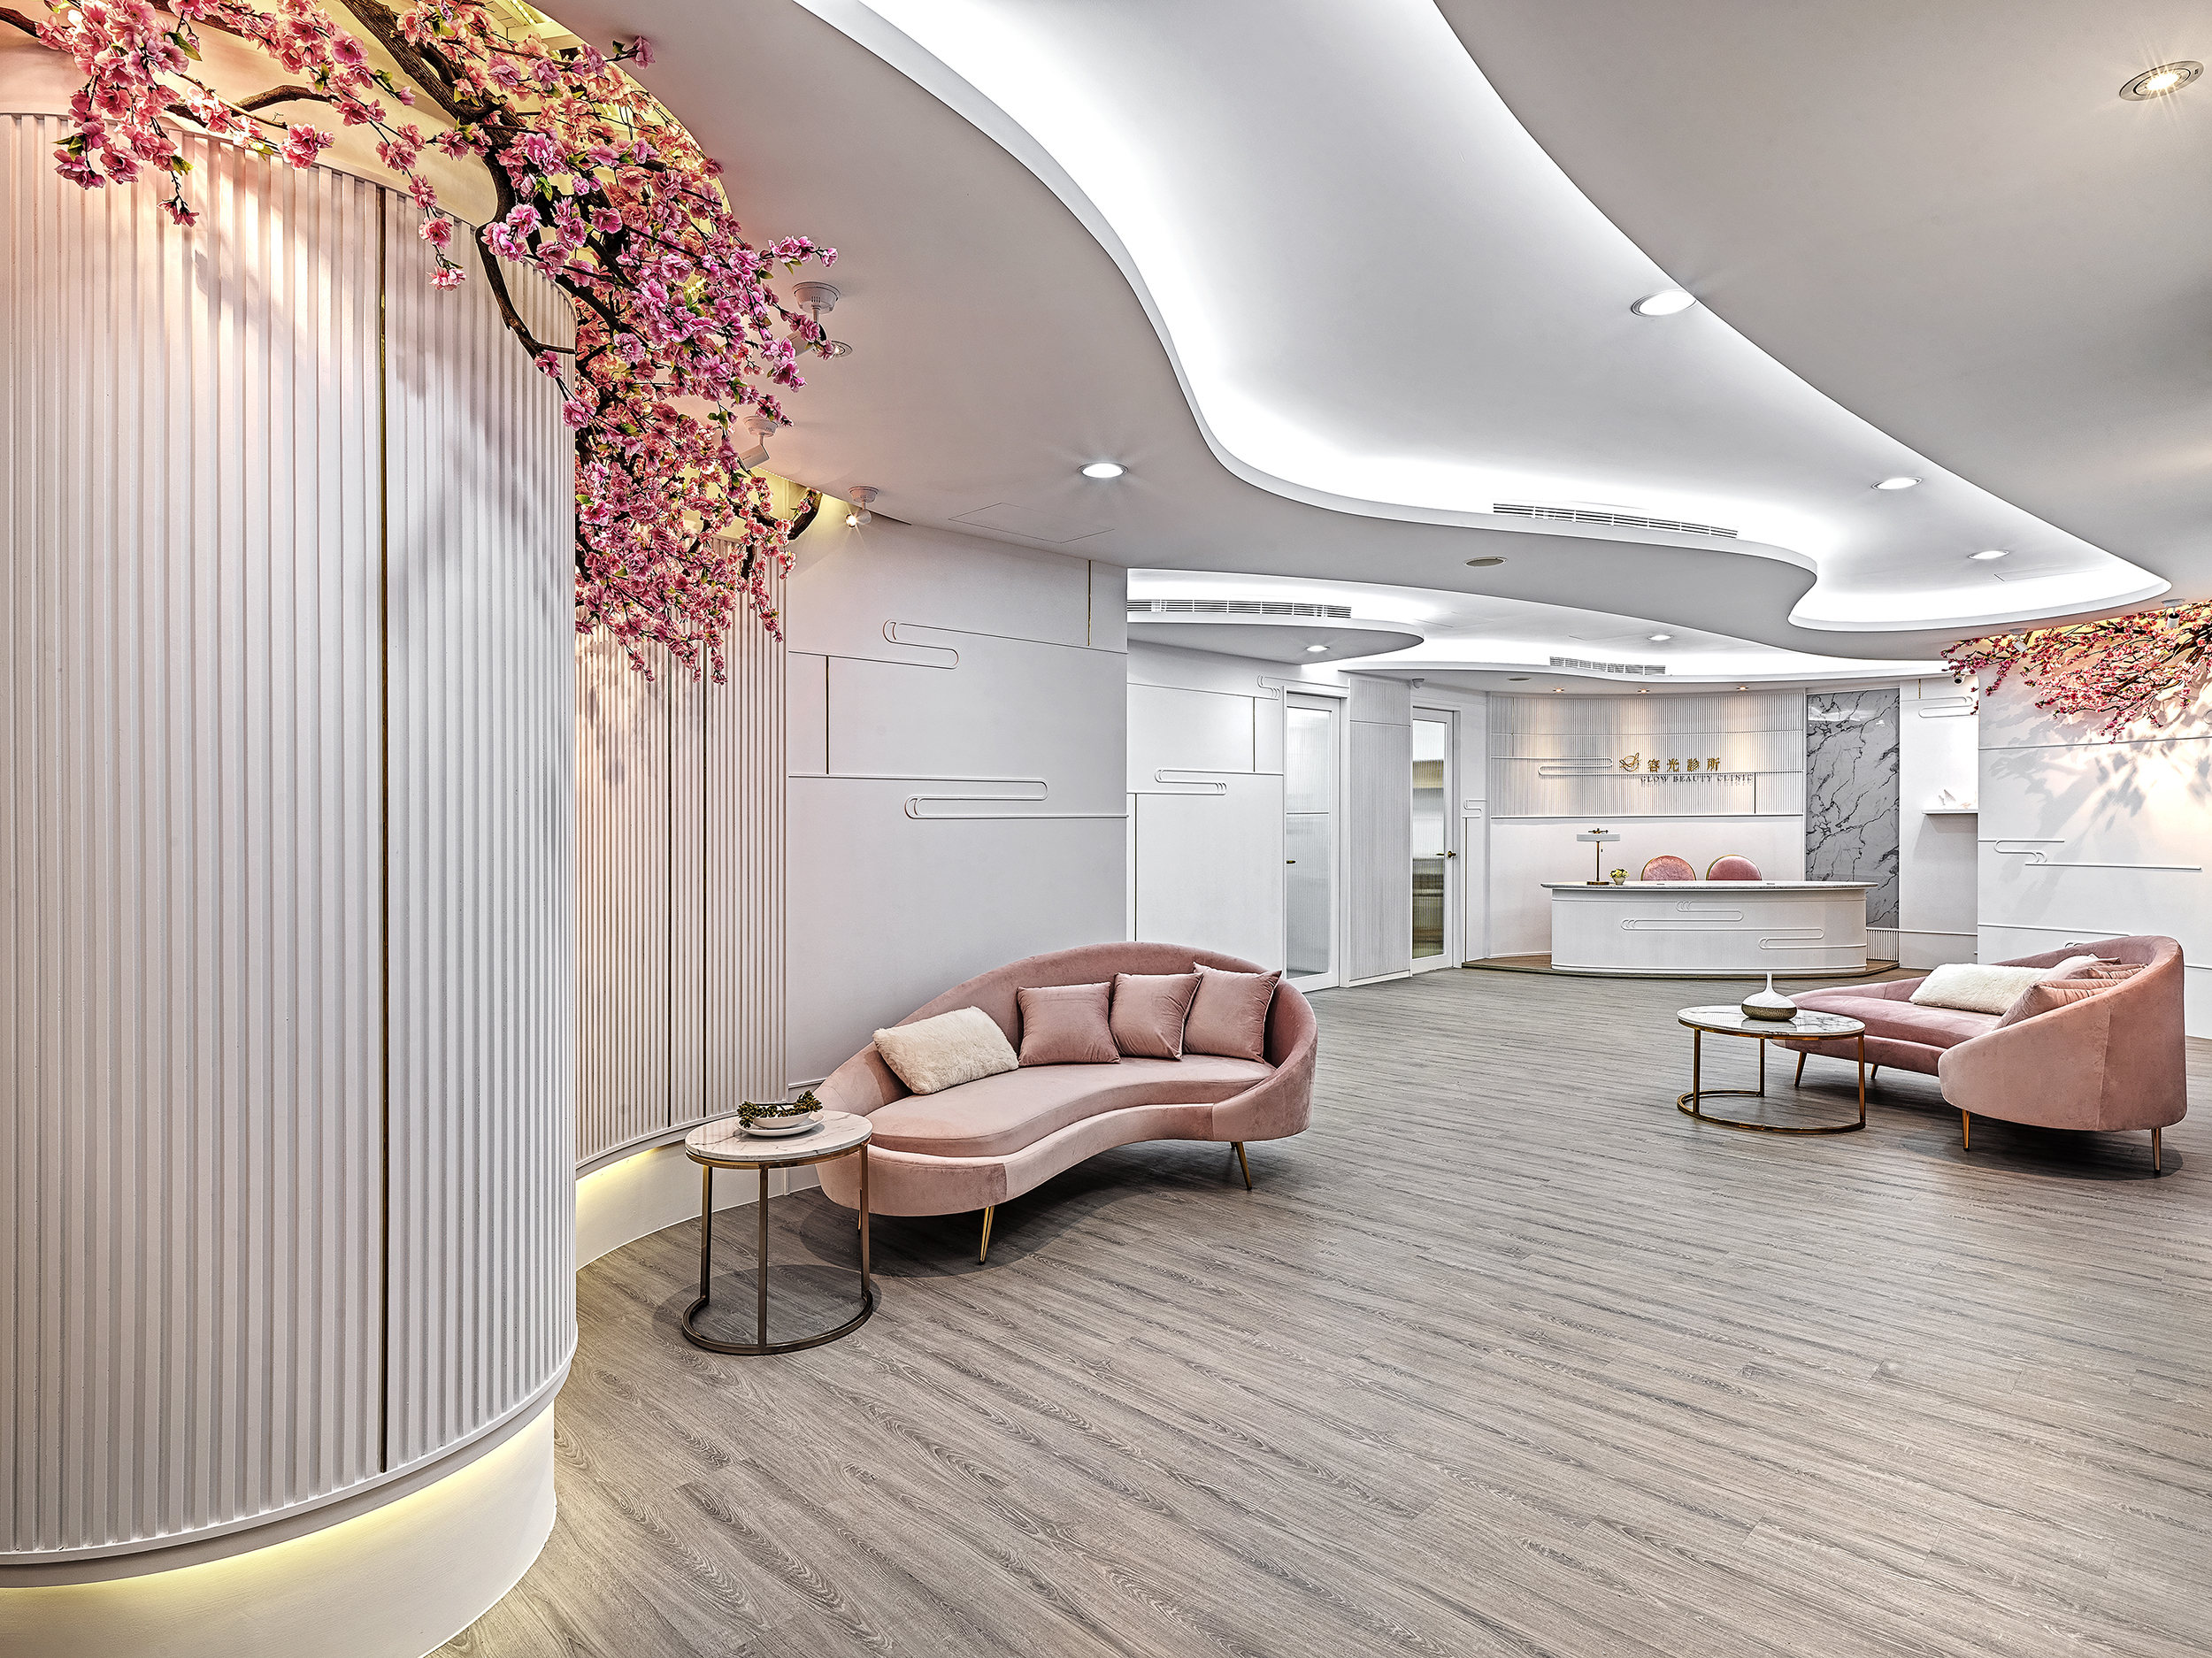 MUSE Design Winners - The Blossom Clinic